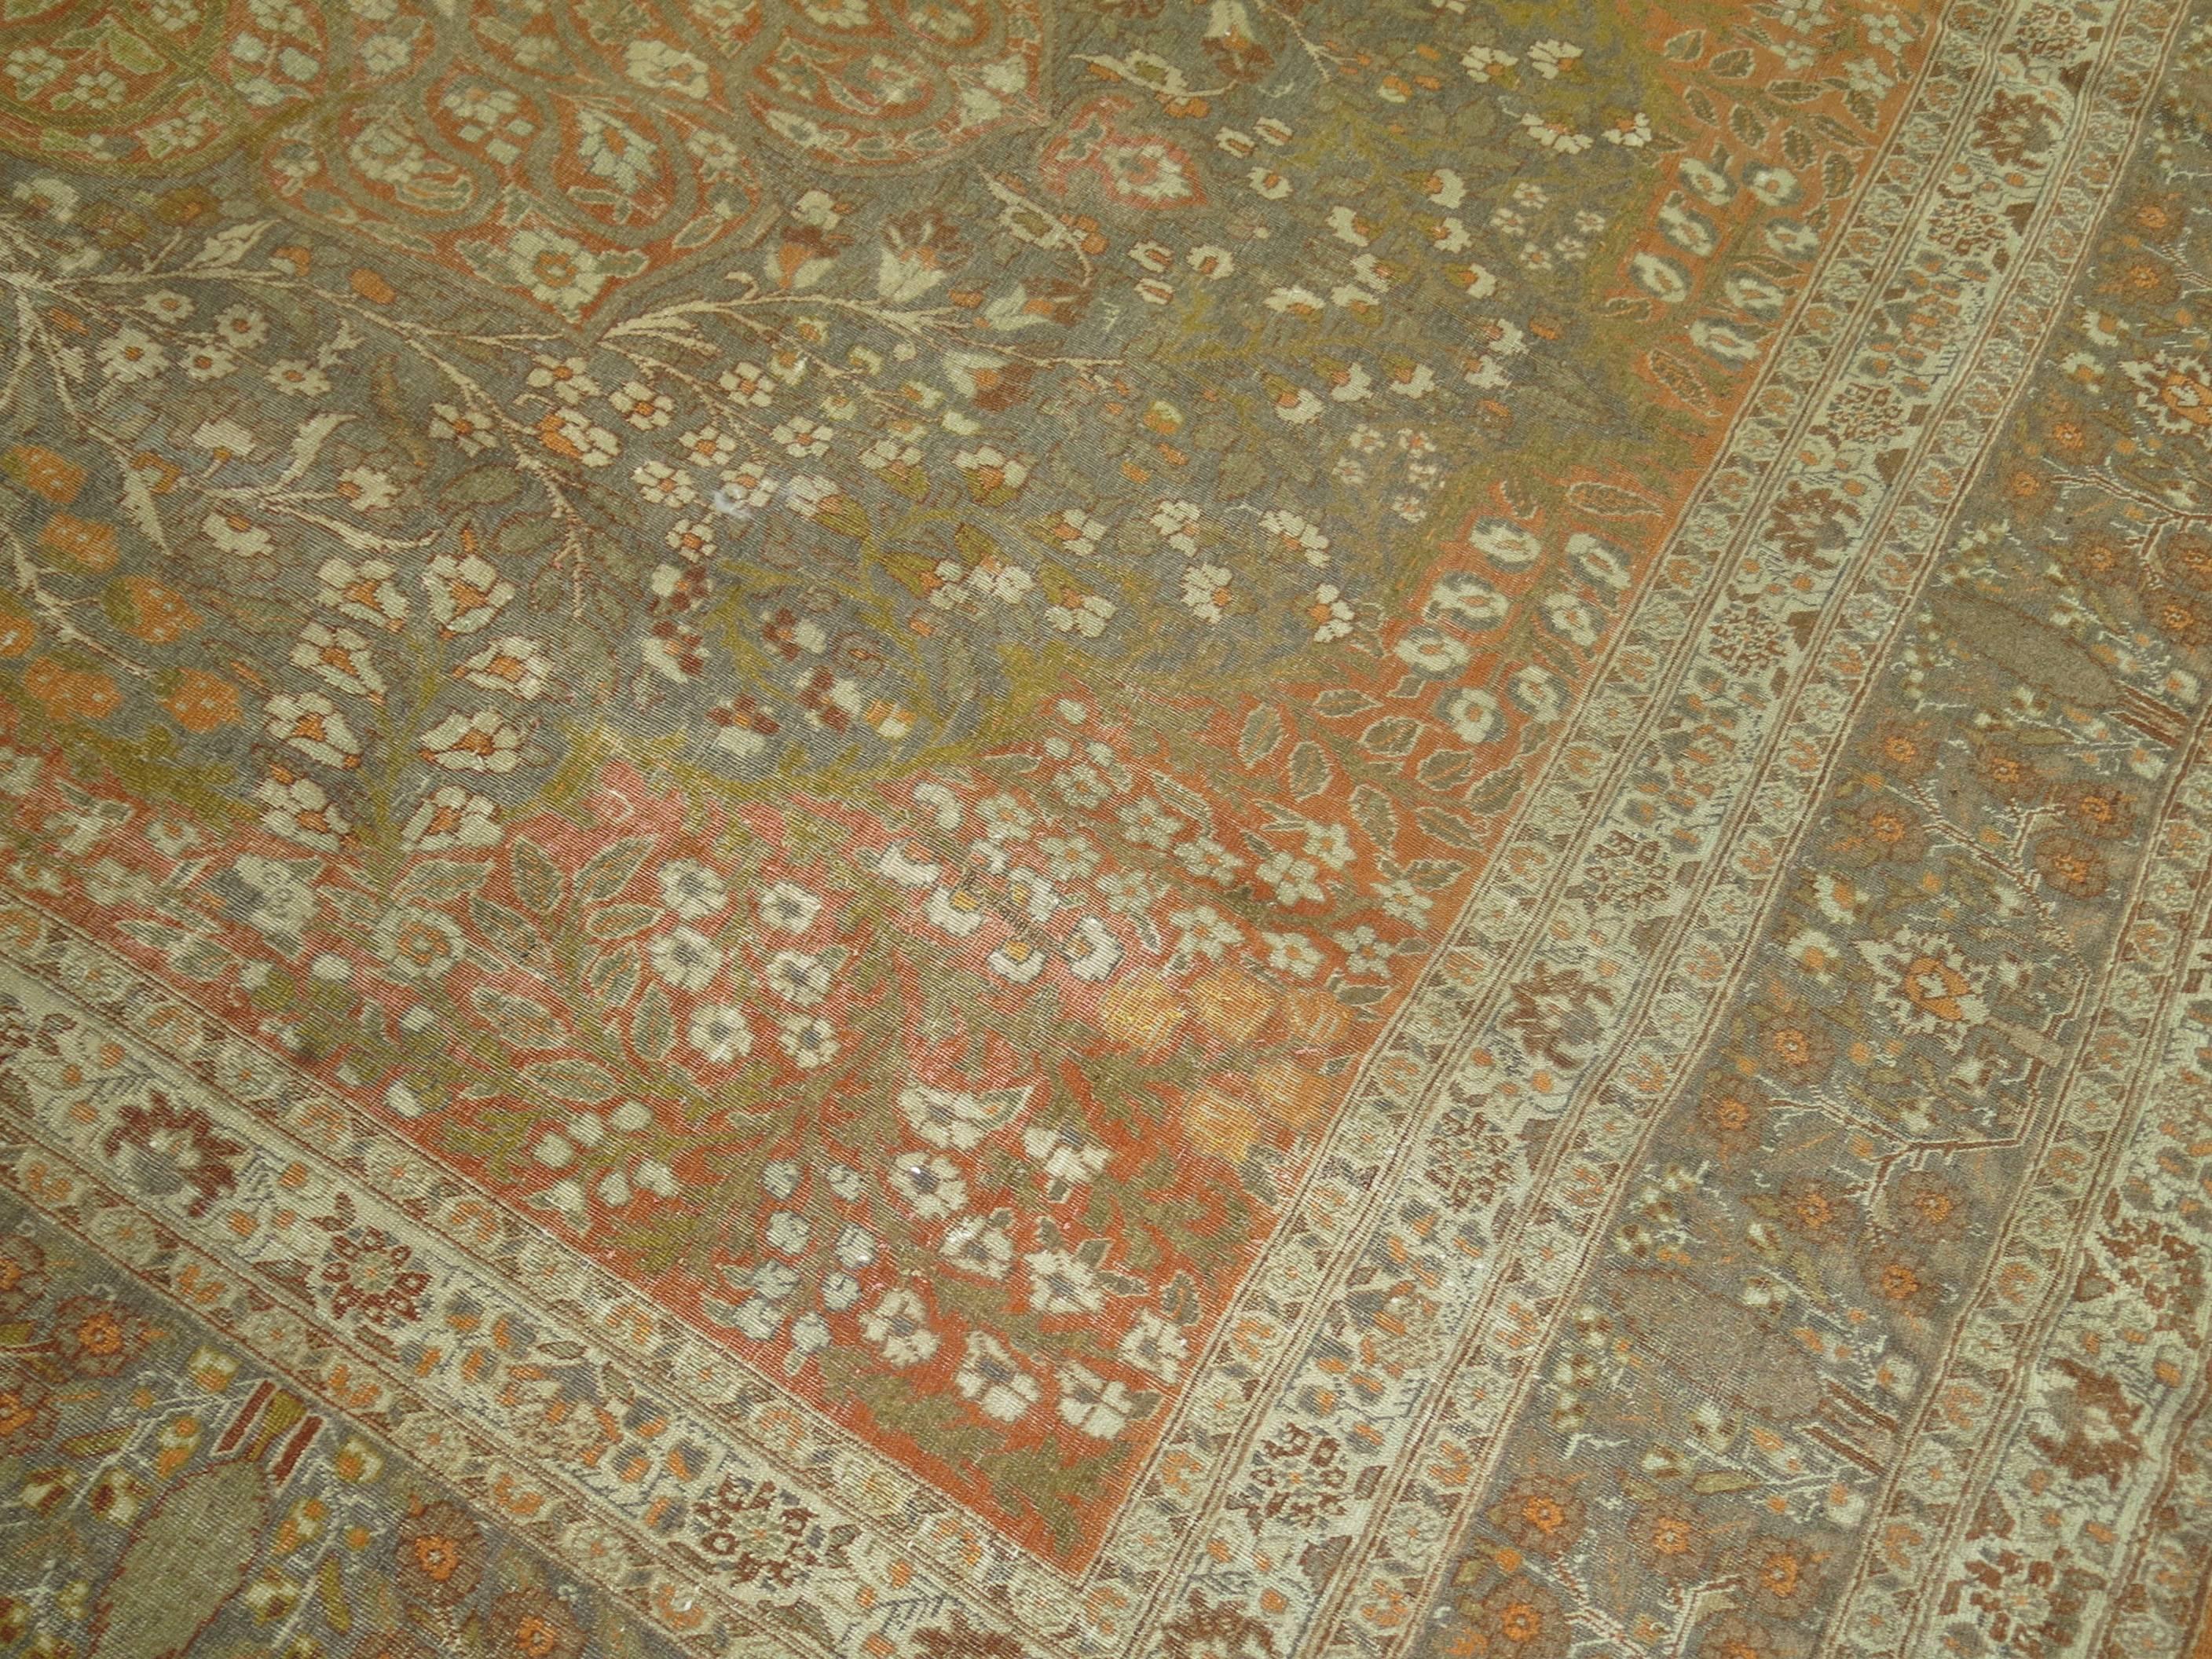 Fine Orange Antique Persian Tabriz Rug In Good Condition For Sale In New York, NY